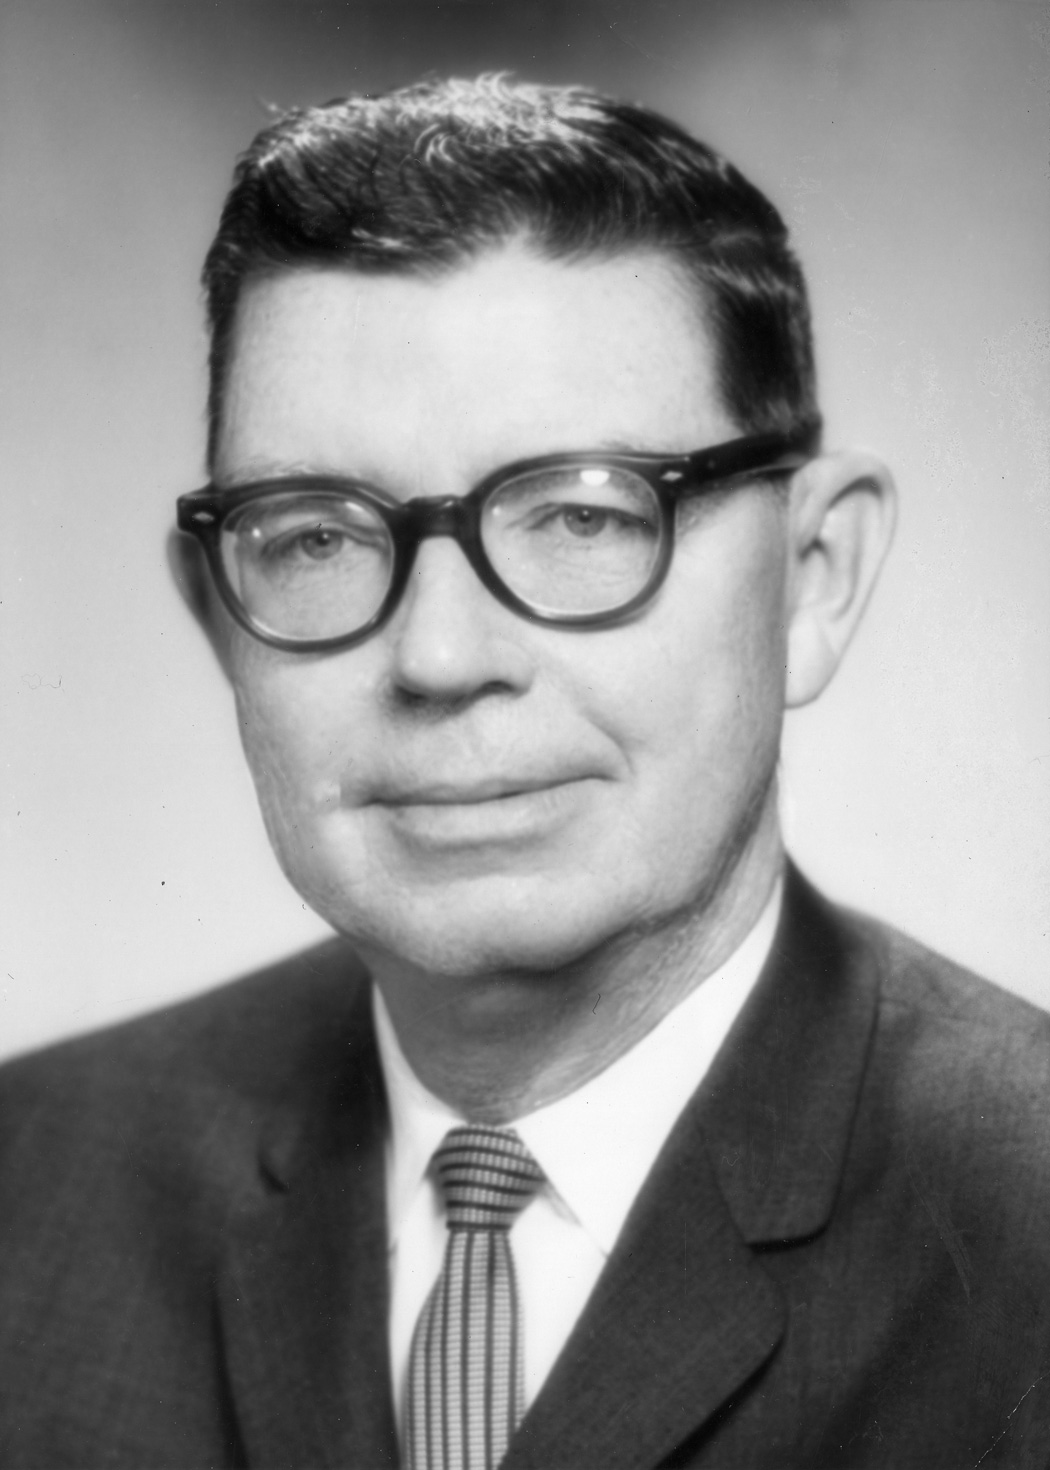 Portrait of Leo Cain, first President of CSC Dominguez Hills. LEo Cain was appointed president of South Bay College in 1962 and guided the establishment of the college through two name changes, 40-plus potential sites, political attempts to shut down the college, and the institution's architectural and curriculum development. He served as president until 1976